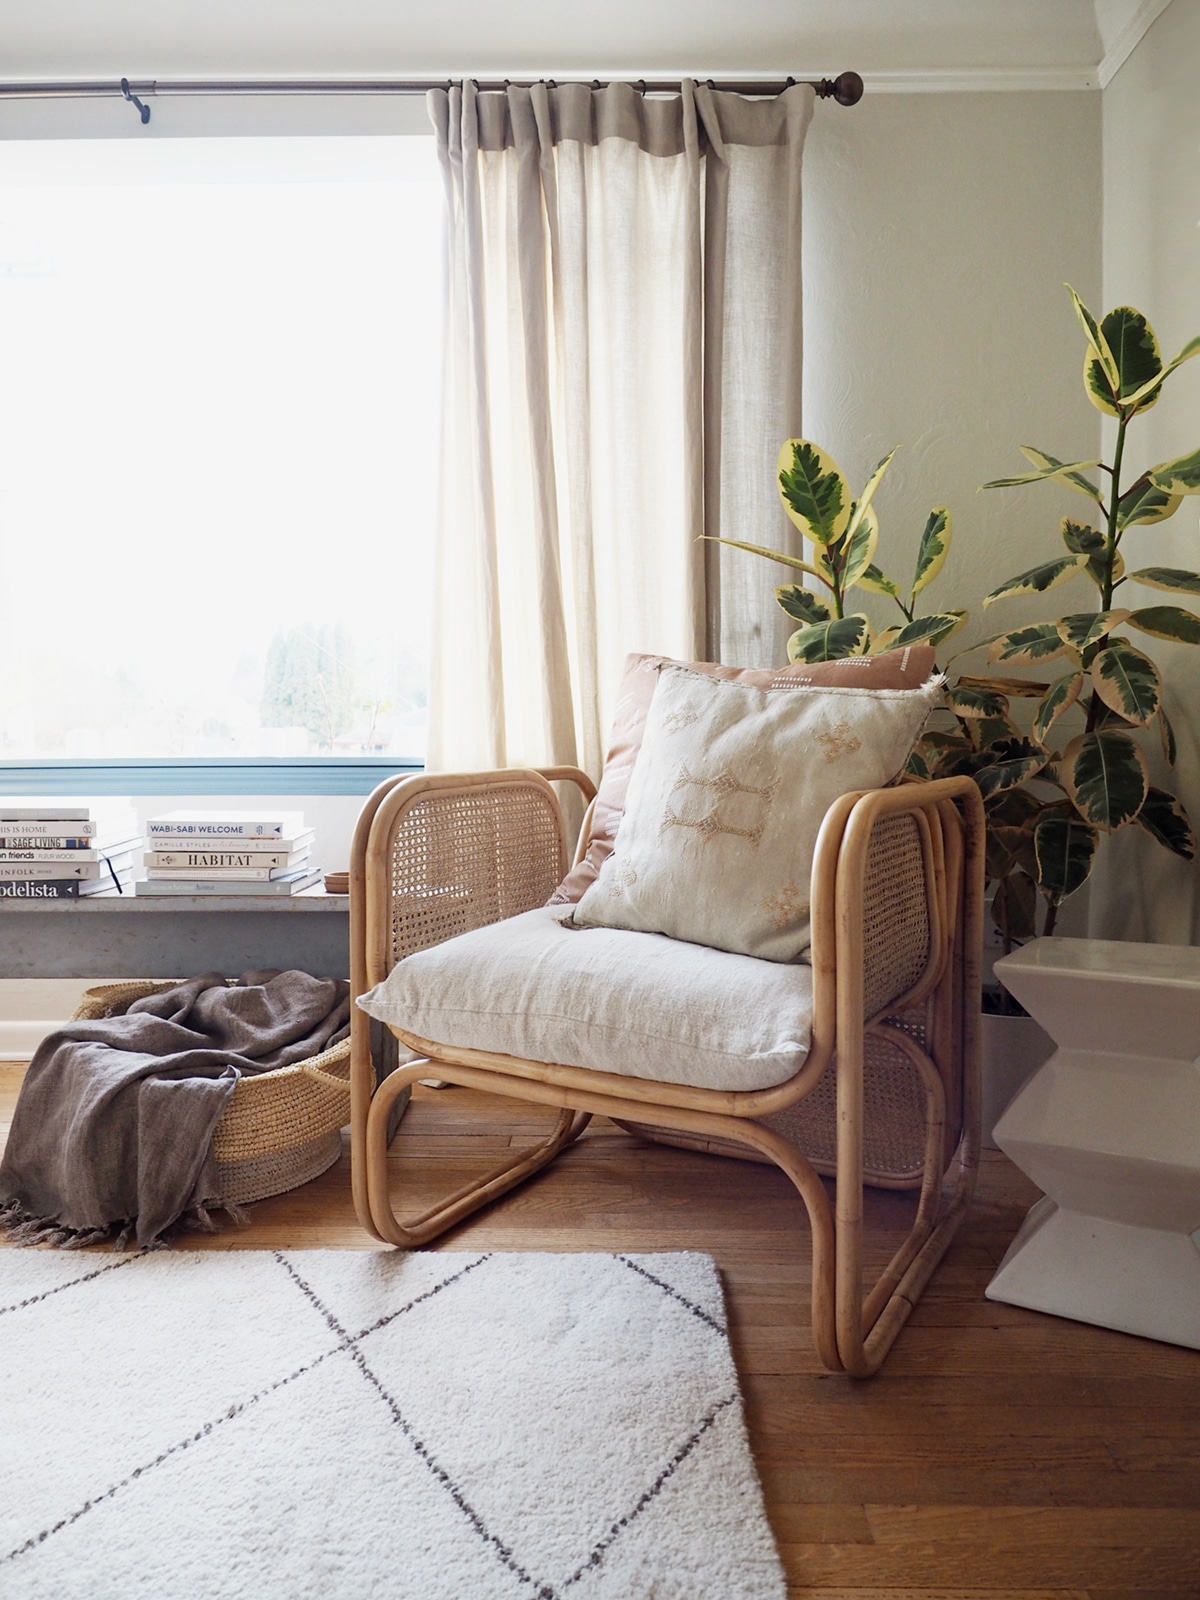 vintage-cane-chair-with-rounded-edges-and-chic-boho-styling-cassandra-lavalle-coco-kelley